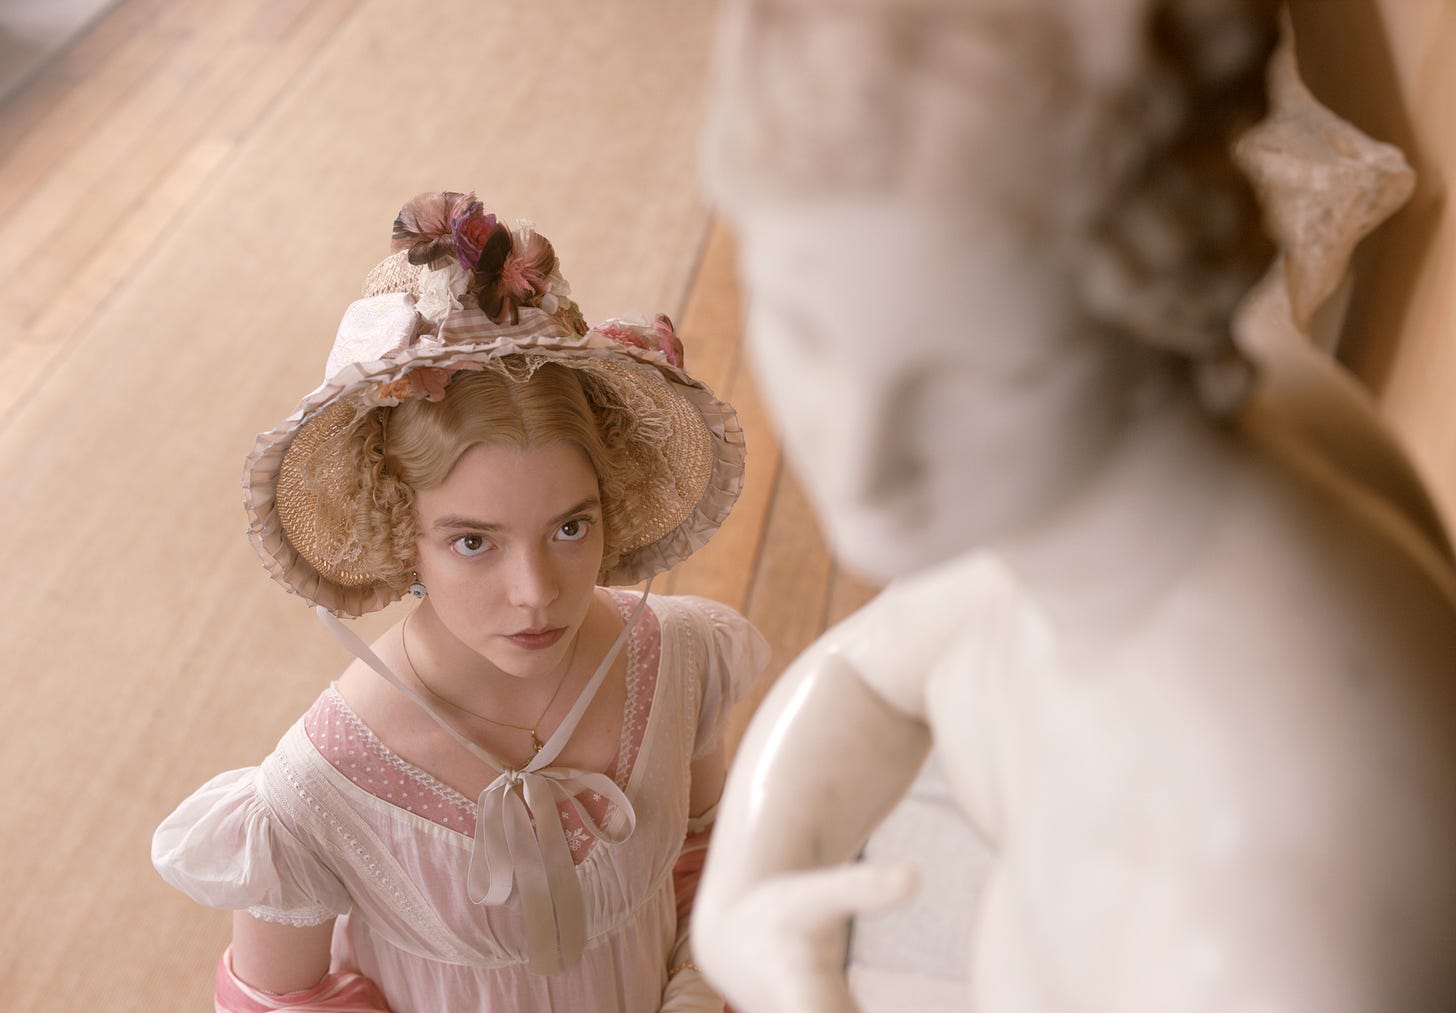 Autumn de Wilde’s 2020 film Emma combines “edible” visuals, innovative compositions, and unexpected casting for a quirky, energetic revisioning of the Jane Austen classic.